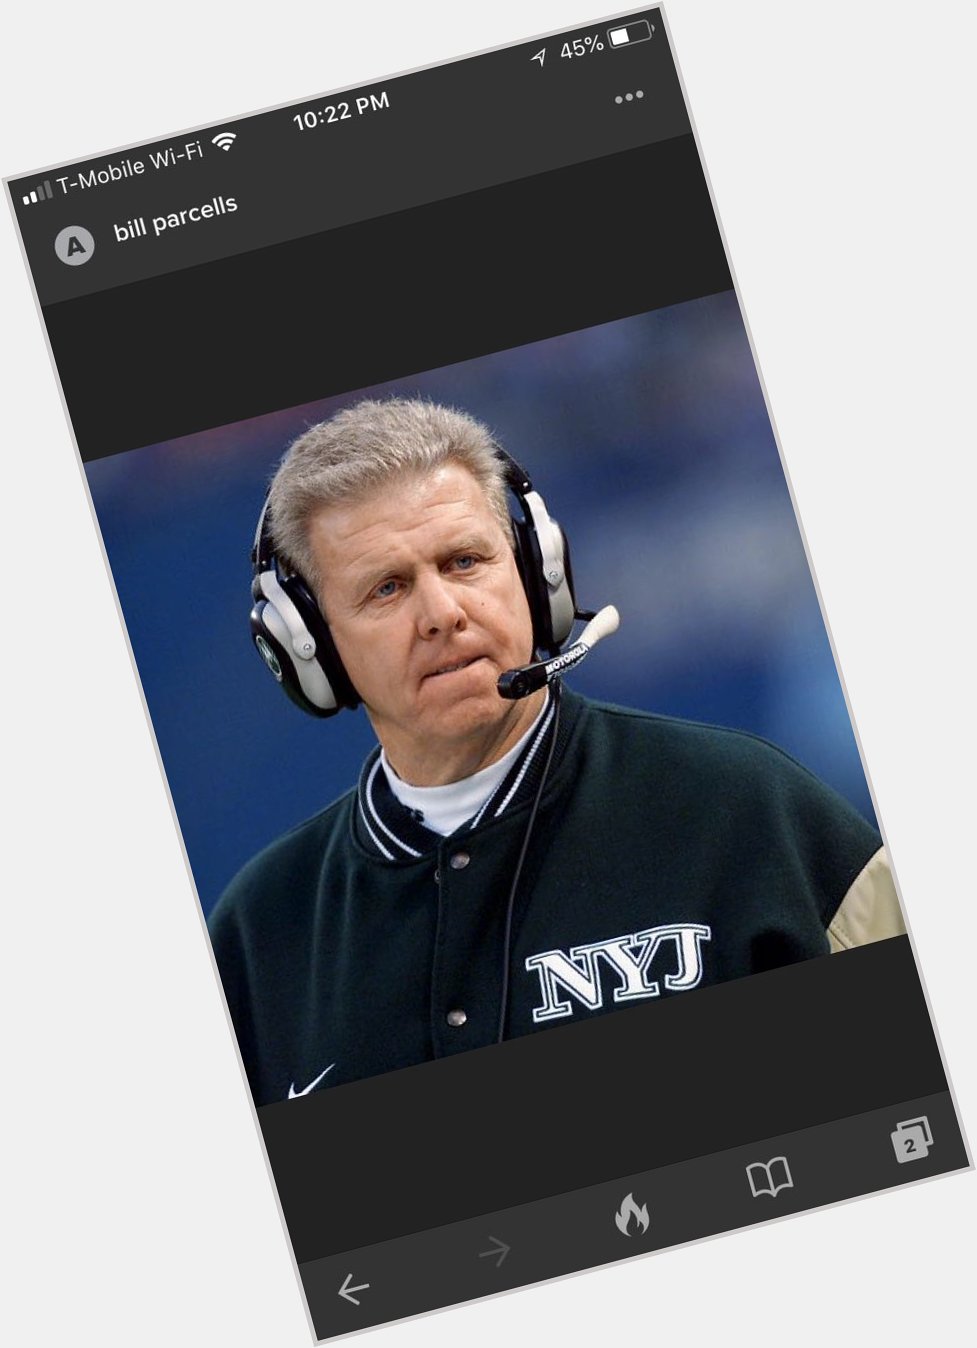 Happy Birthday Bill Parcells! You are one of the greatest coaches of all time. 